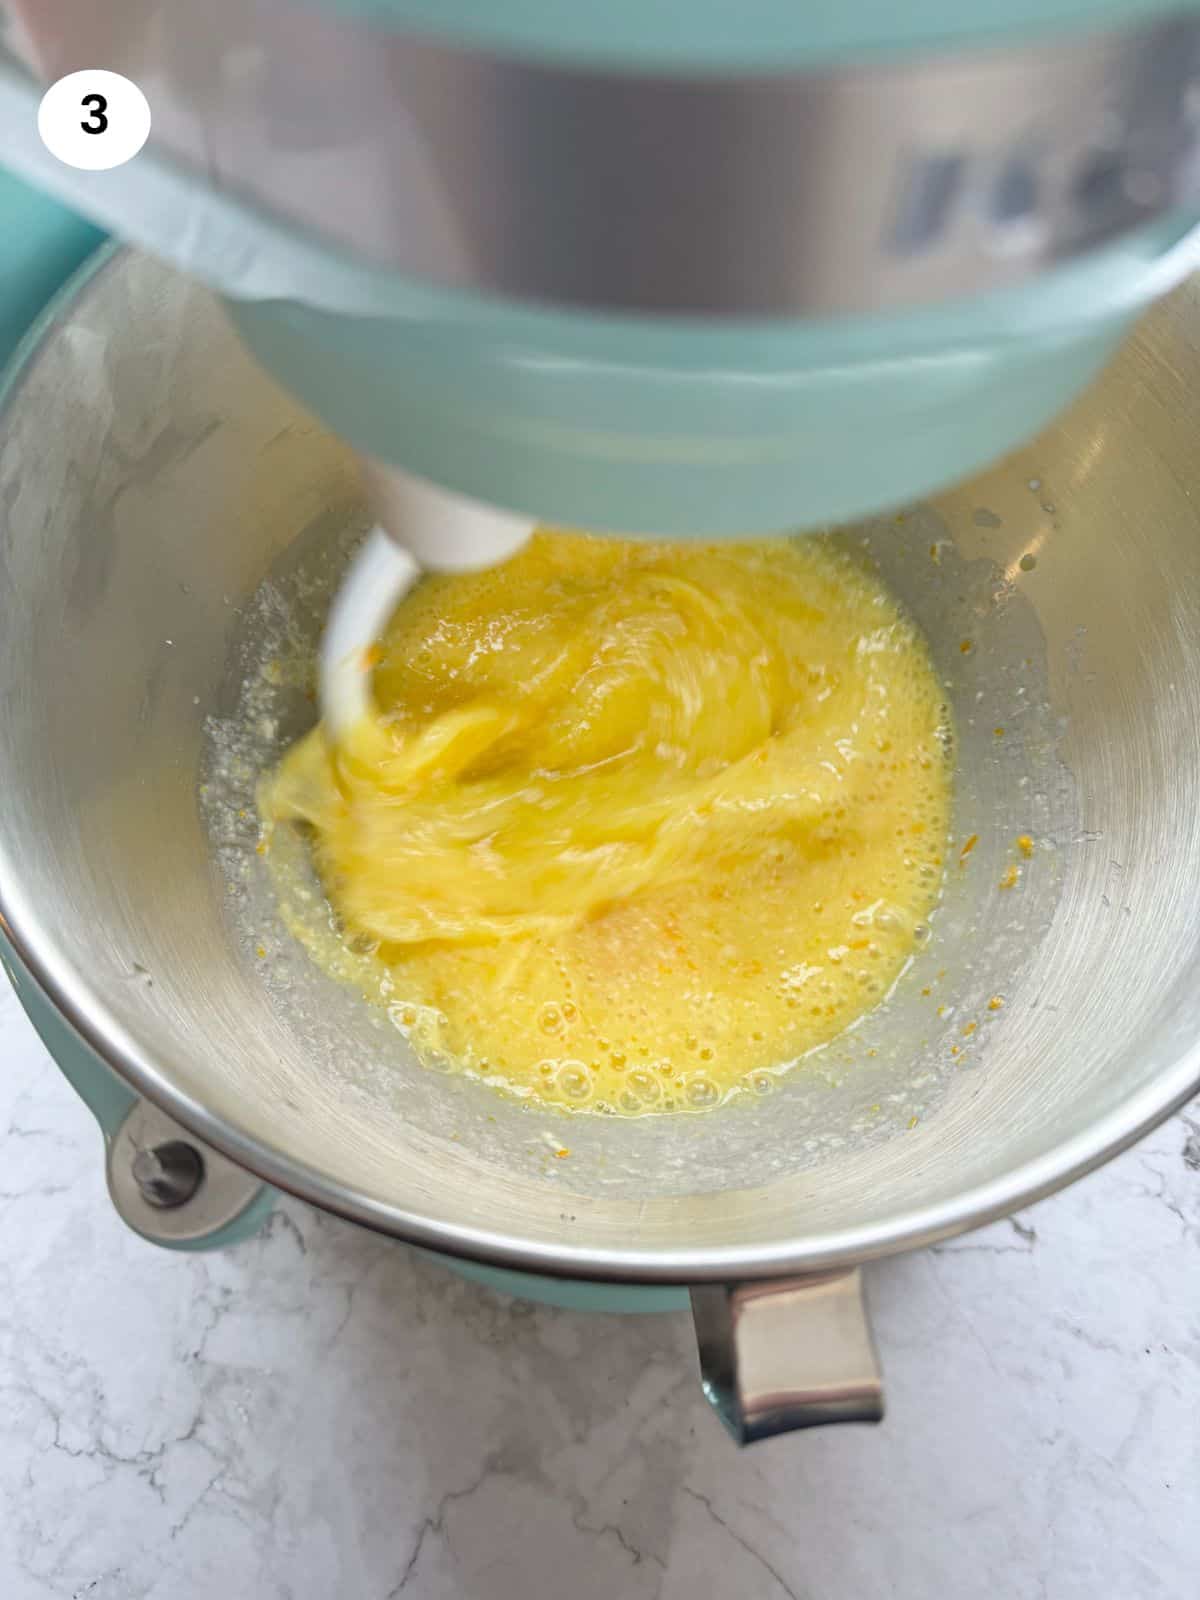 Mixing all wet ingredients with a stand mixer.